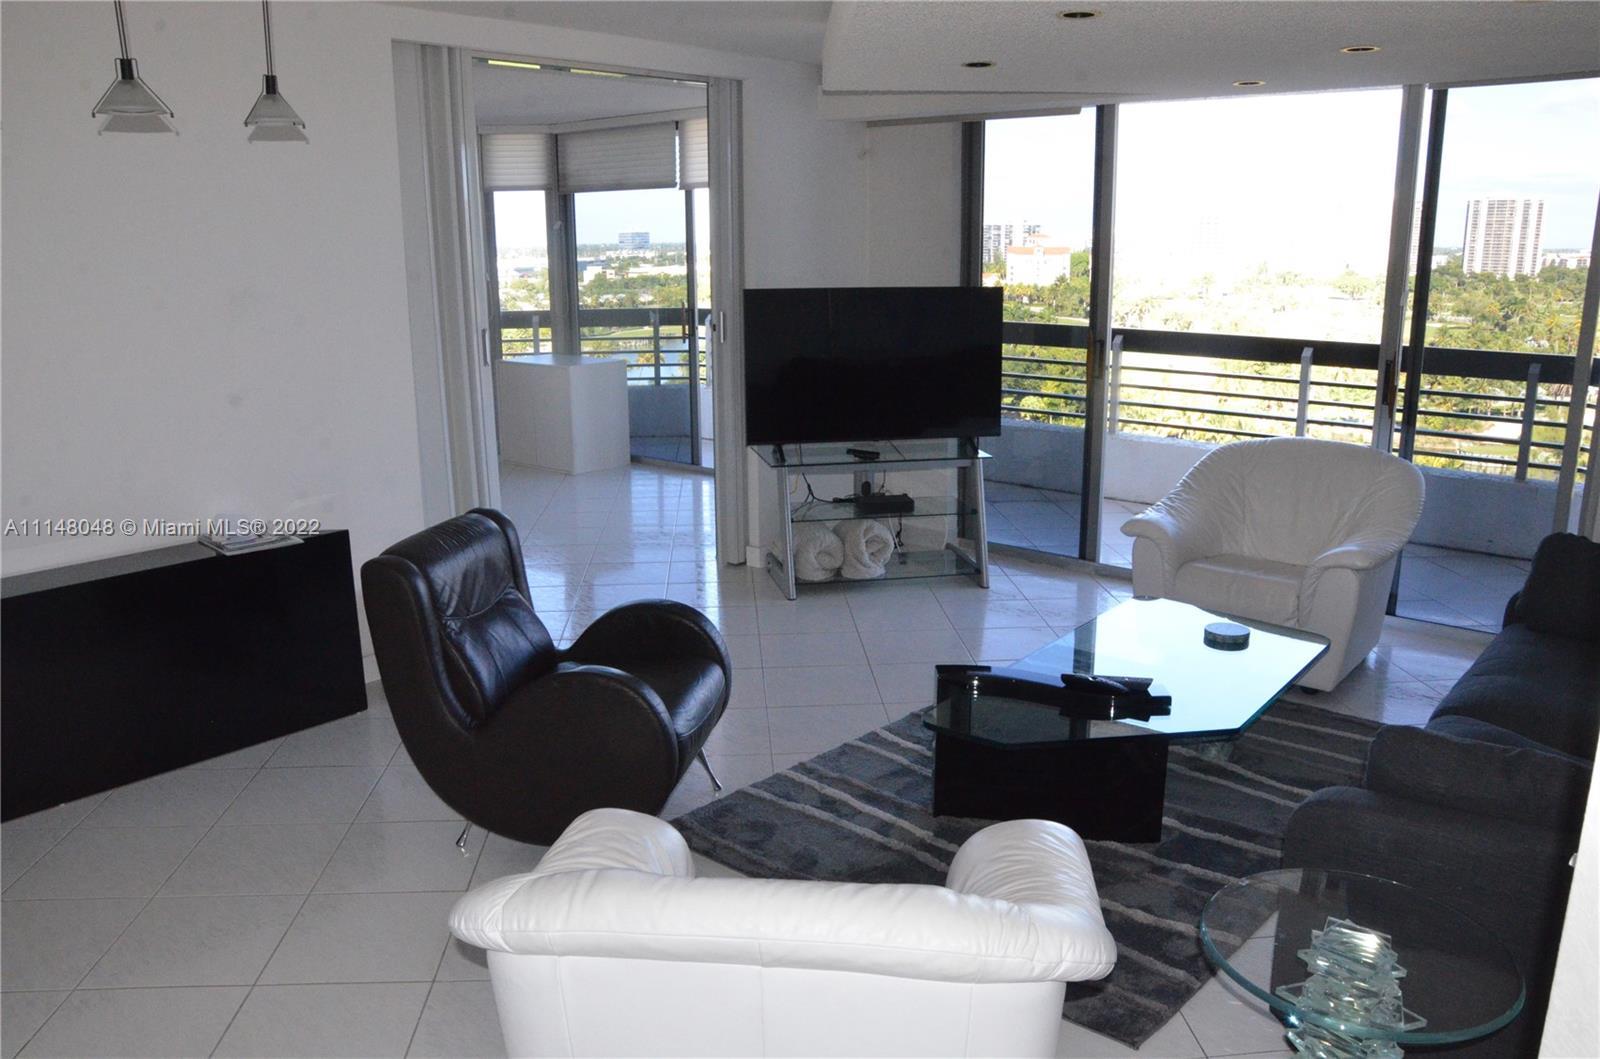 2 bed and den/ 2 baths in Prestigious City of Aventura . Very spacious and comfortable . Large balco